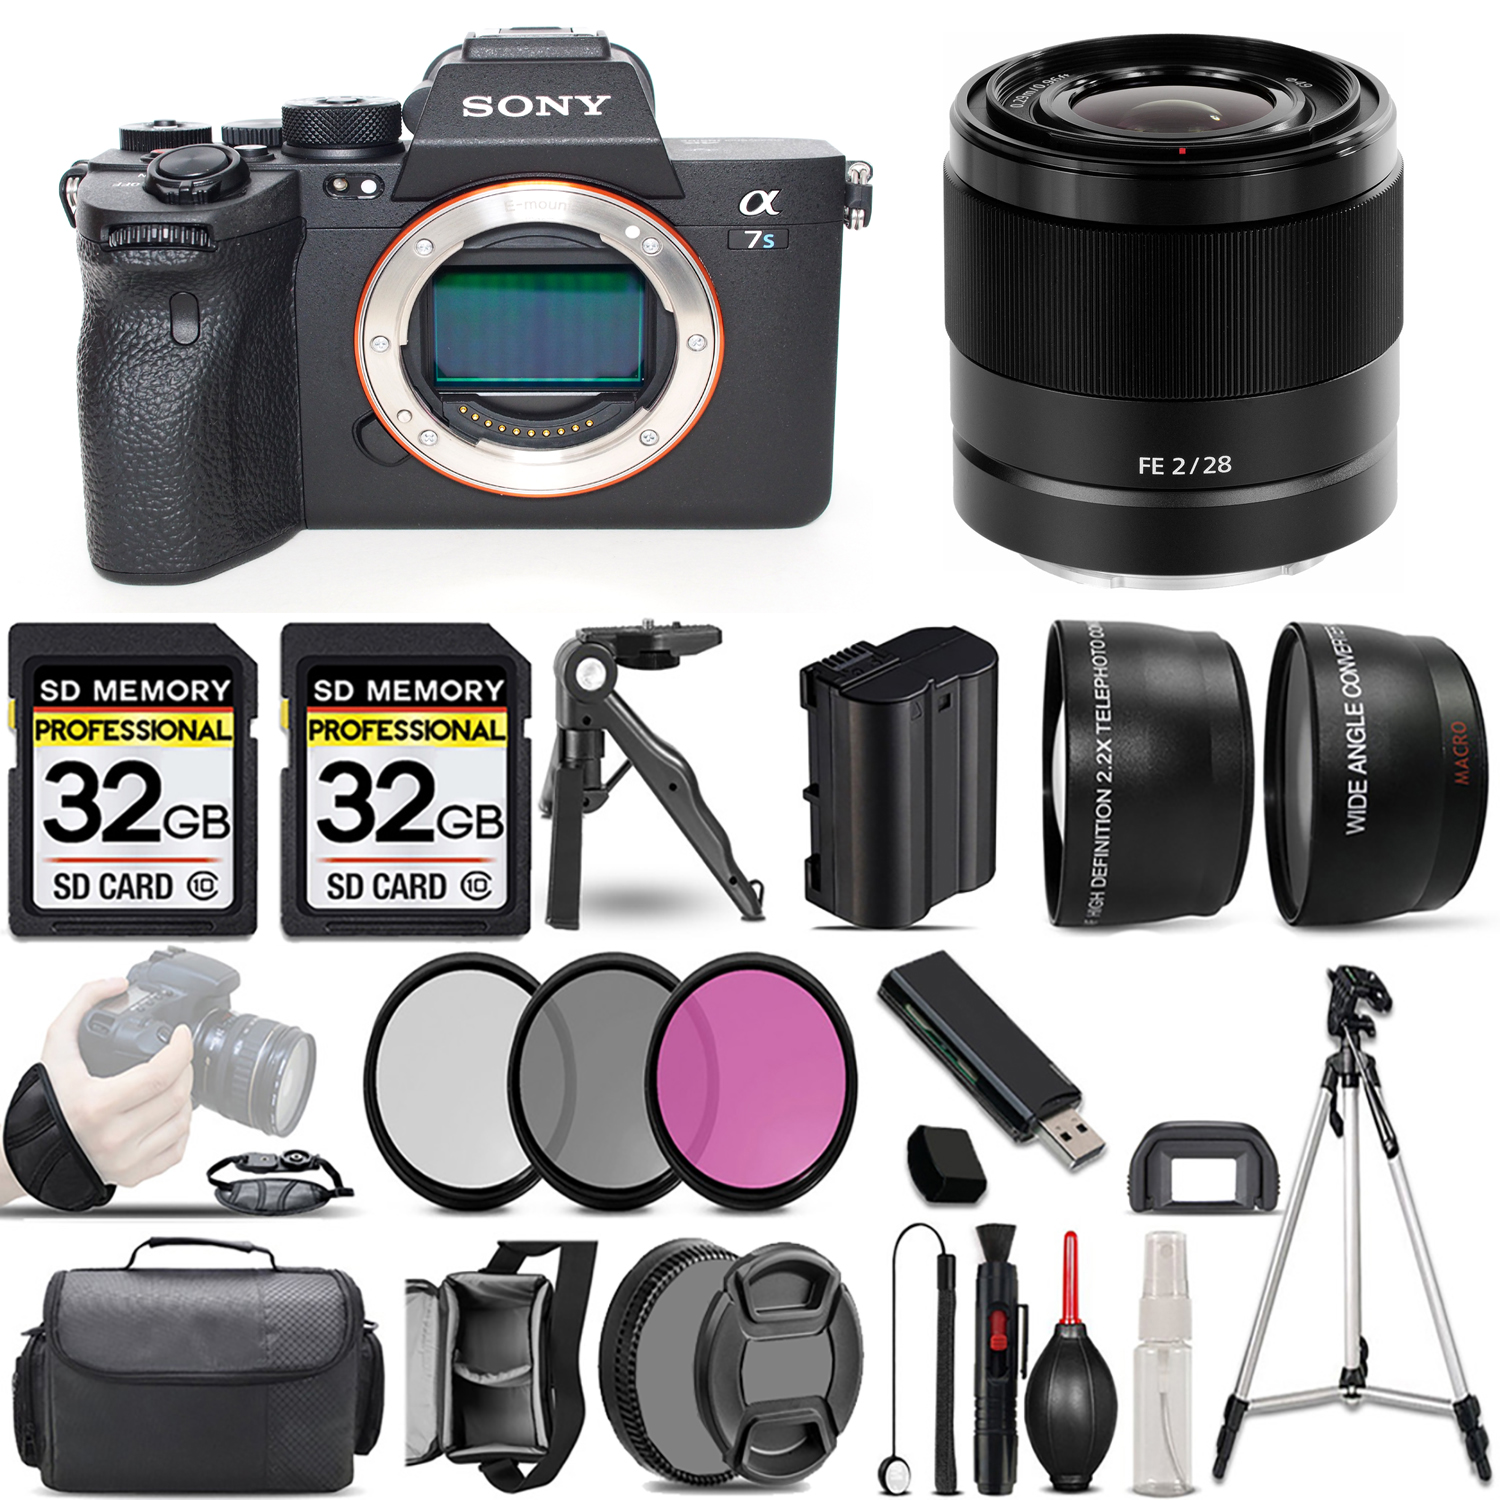 a7S III Mirrorless Camera + 28mm f/2 Lens + 3 Piece Filter Set + 64GB + Bag & More! *FREE SHIPPING*